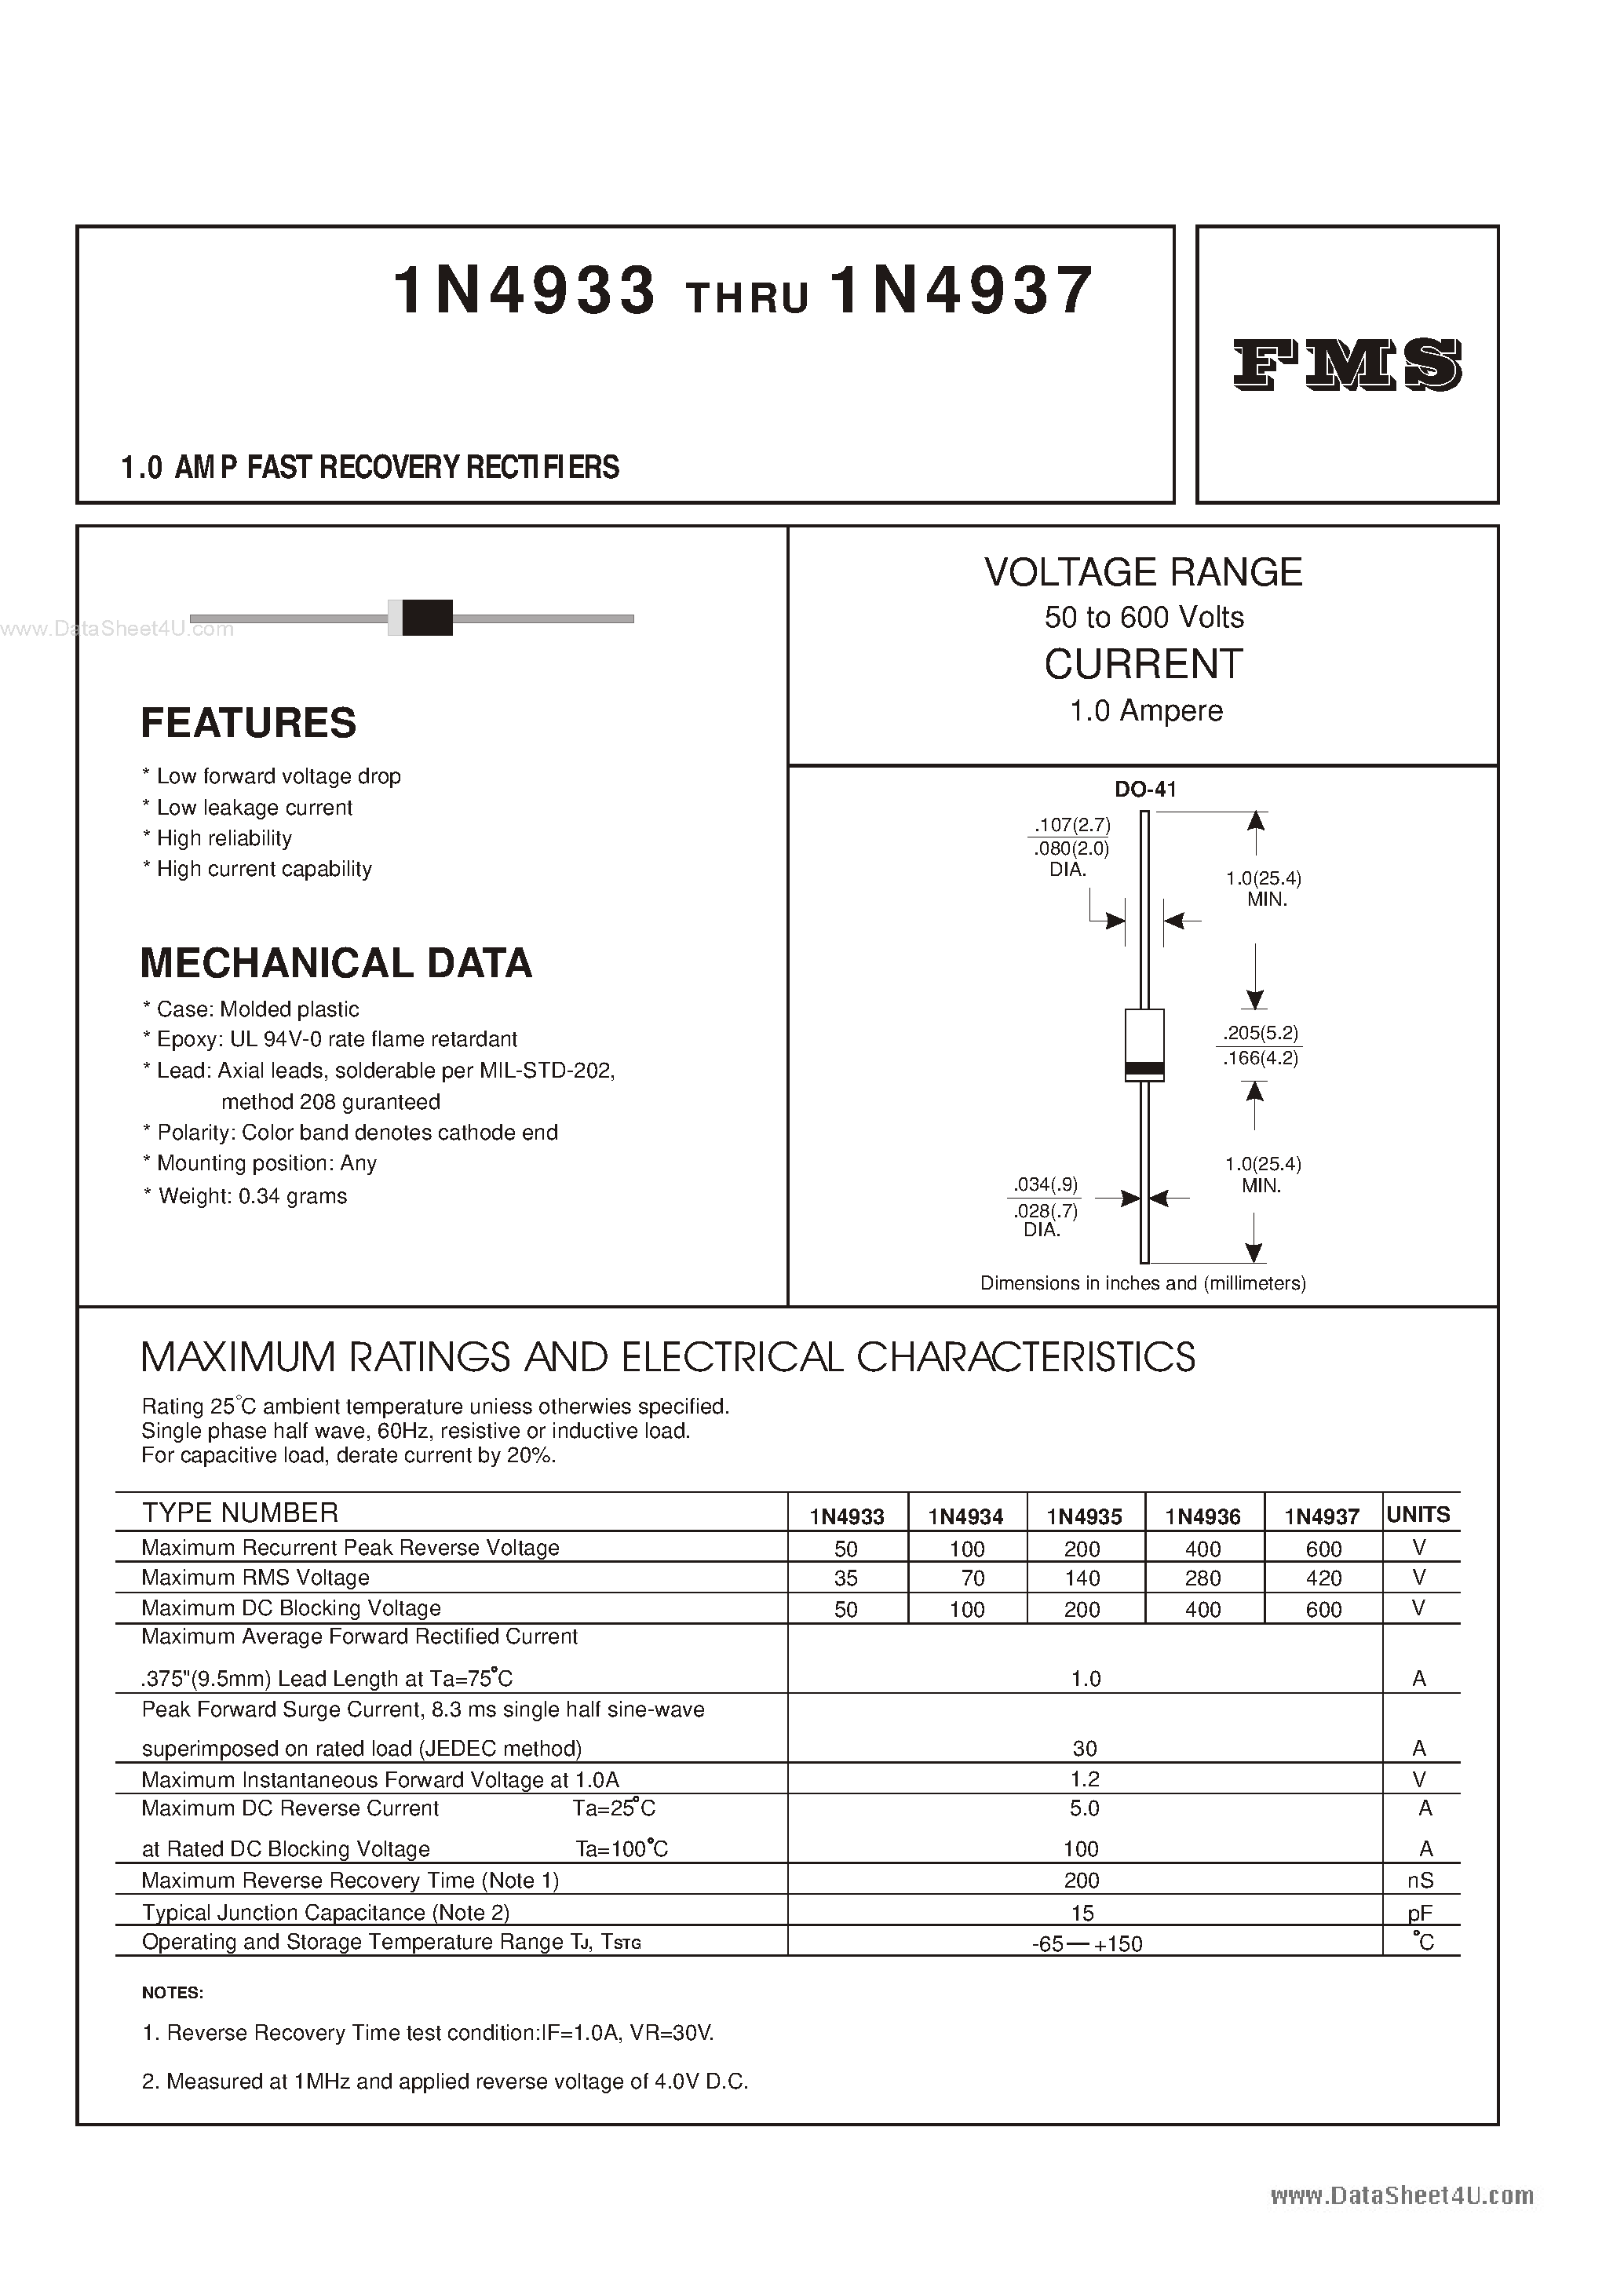 Datasheet IN4933 - (IN4933 - IN4937) 1.0 AMP FAST RECOVERY RECTIFIERS page 1